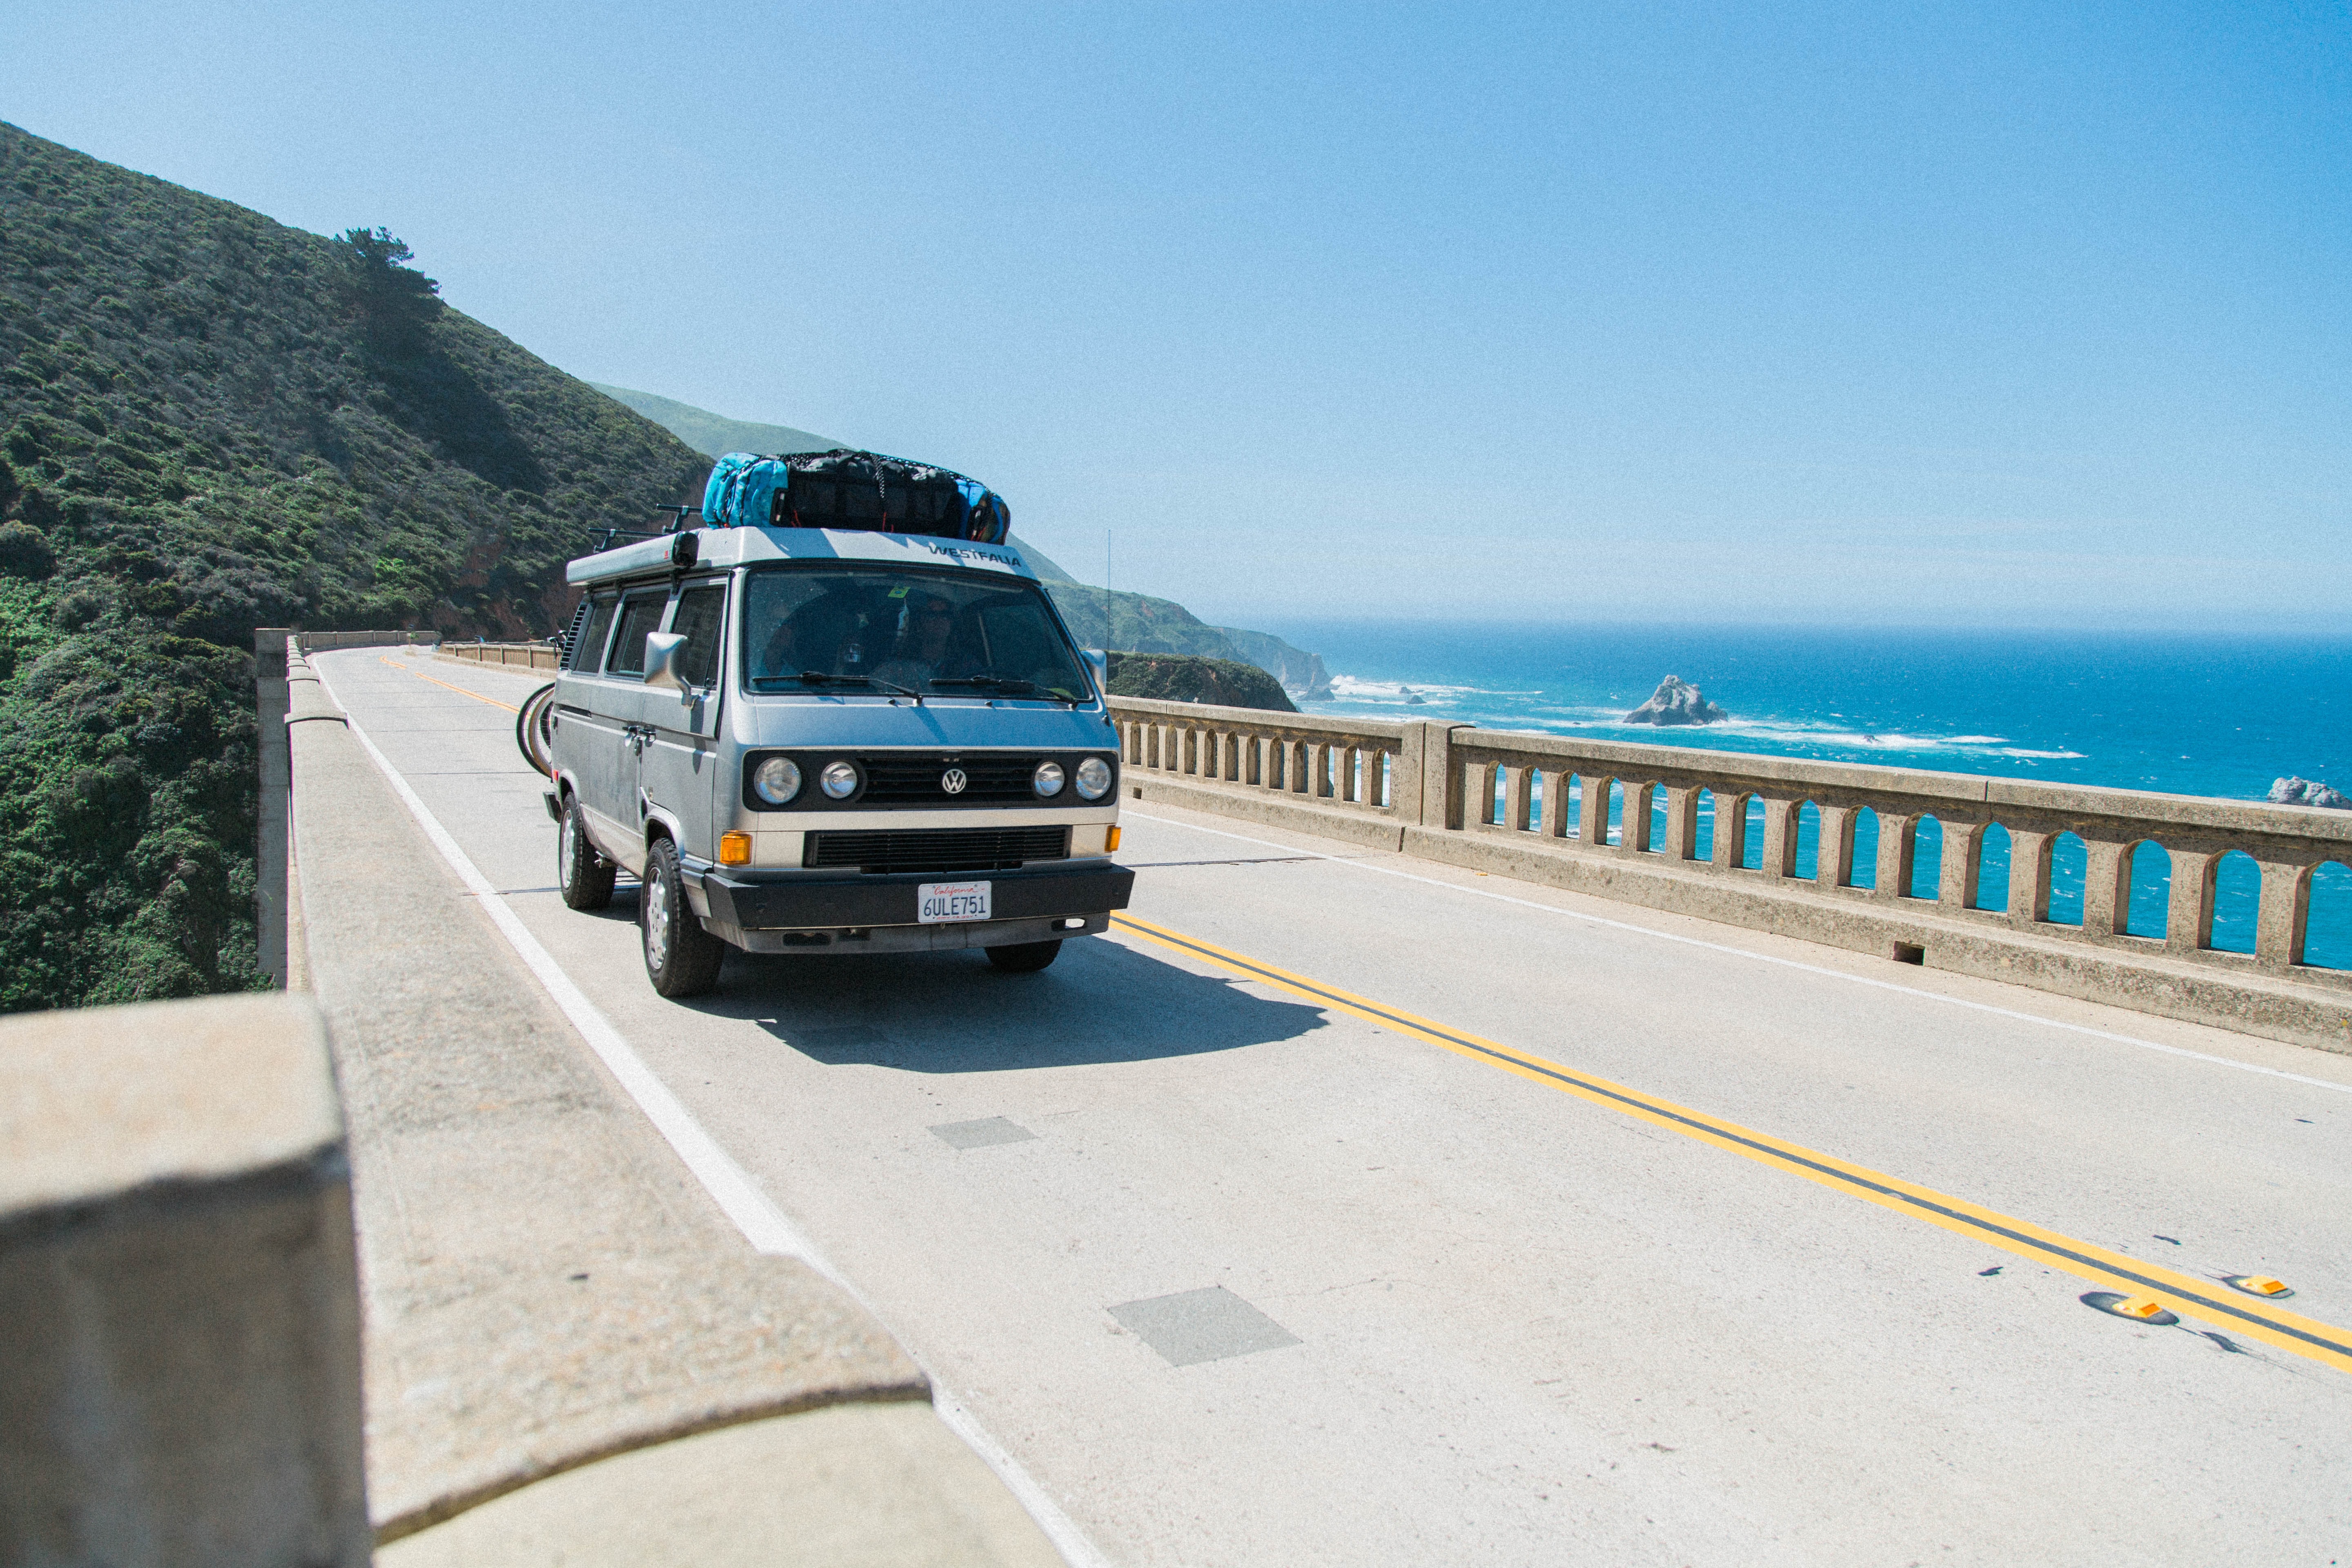 Van crossing a bridge over the ocean with hills and cliffs in the background